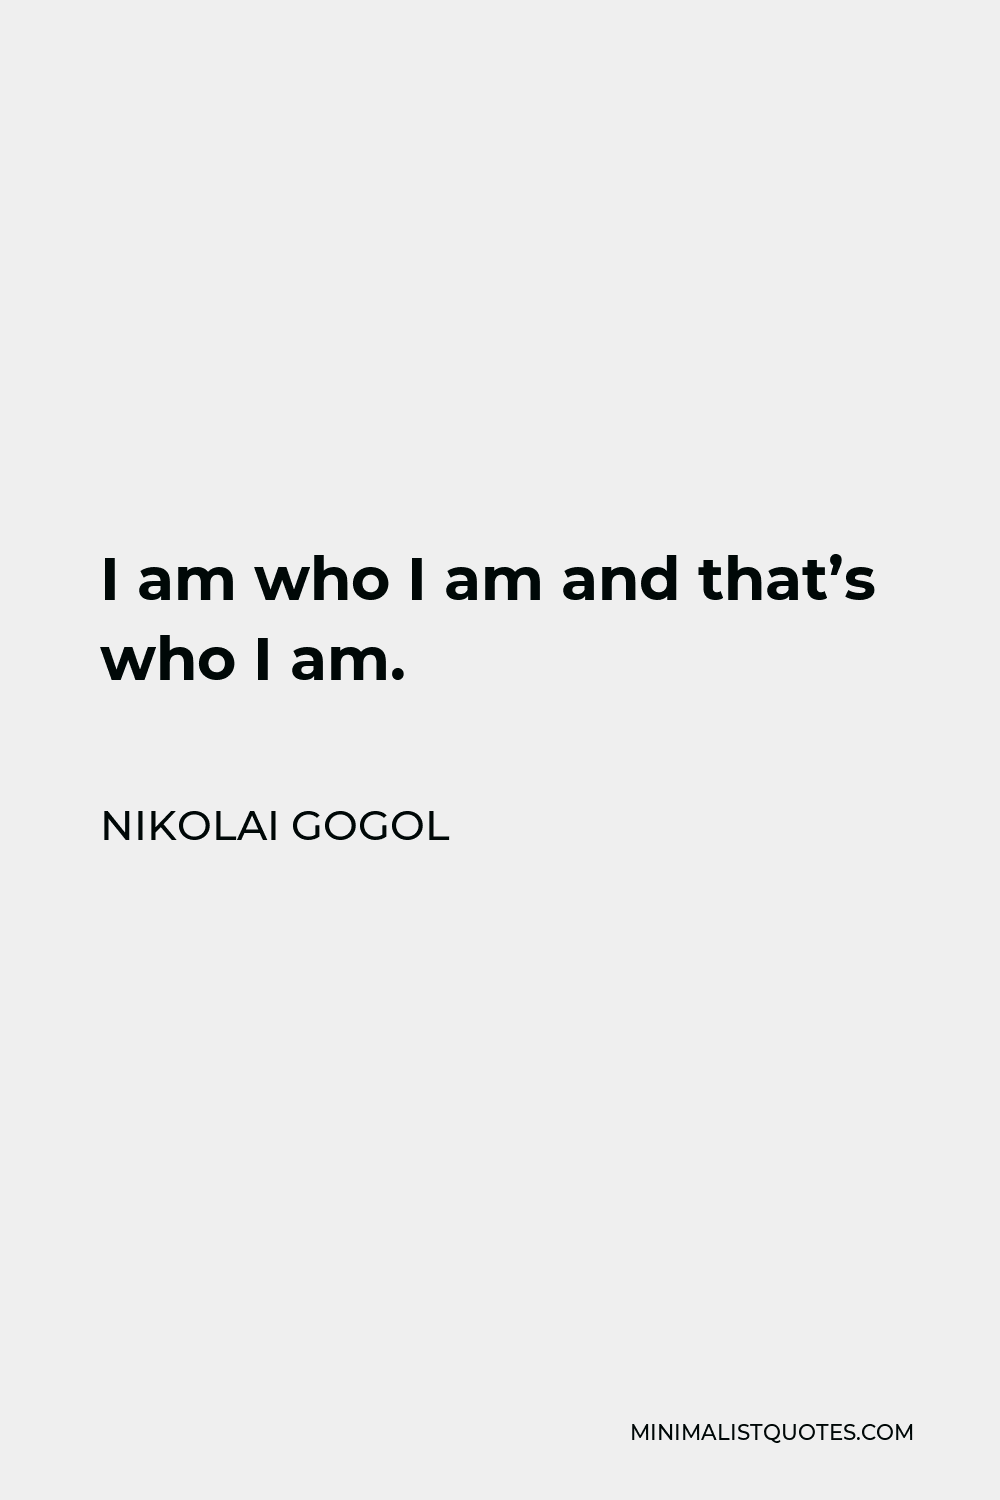 Nikolai Gogol Quote - I am who I am and that’s who I am.